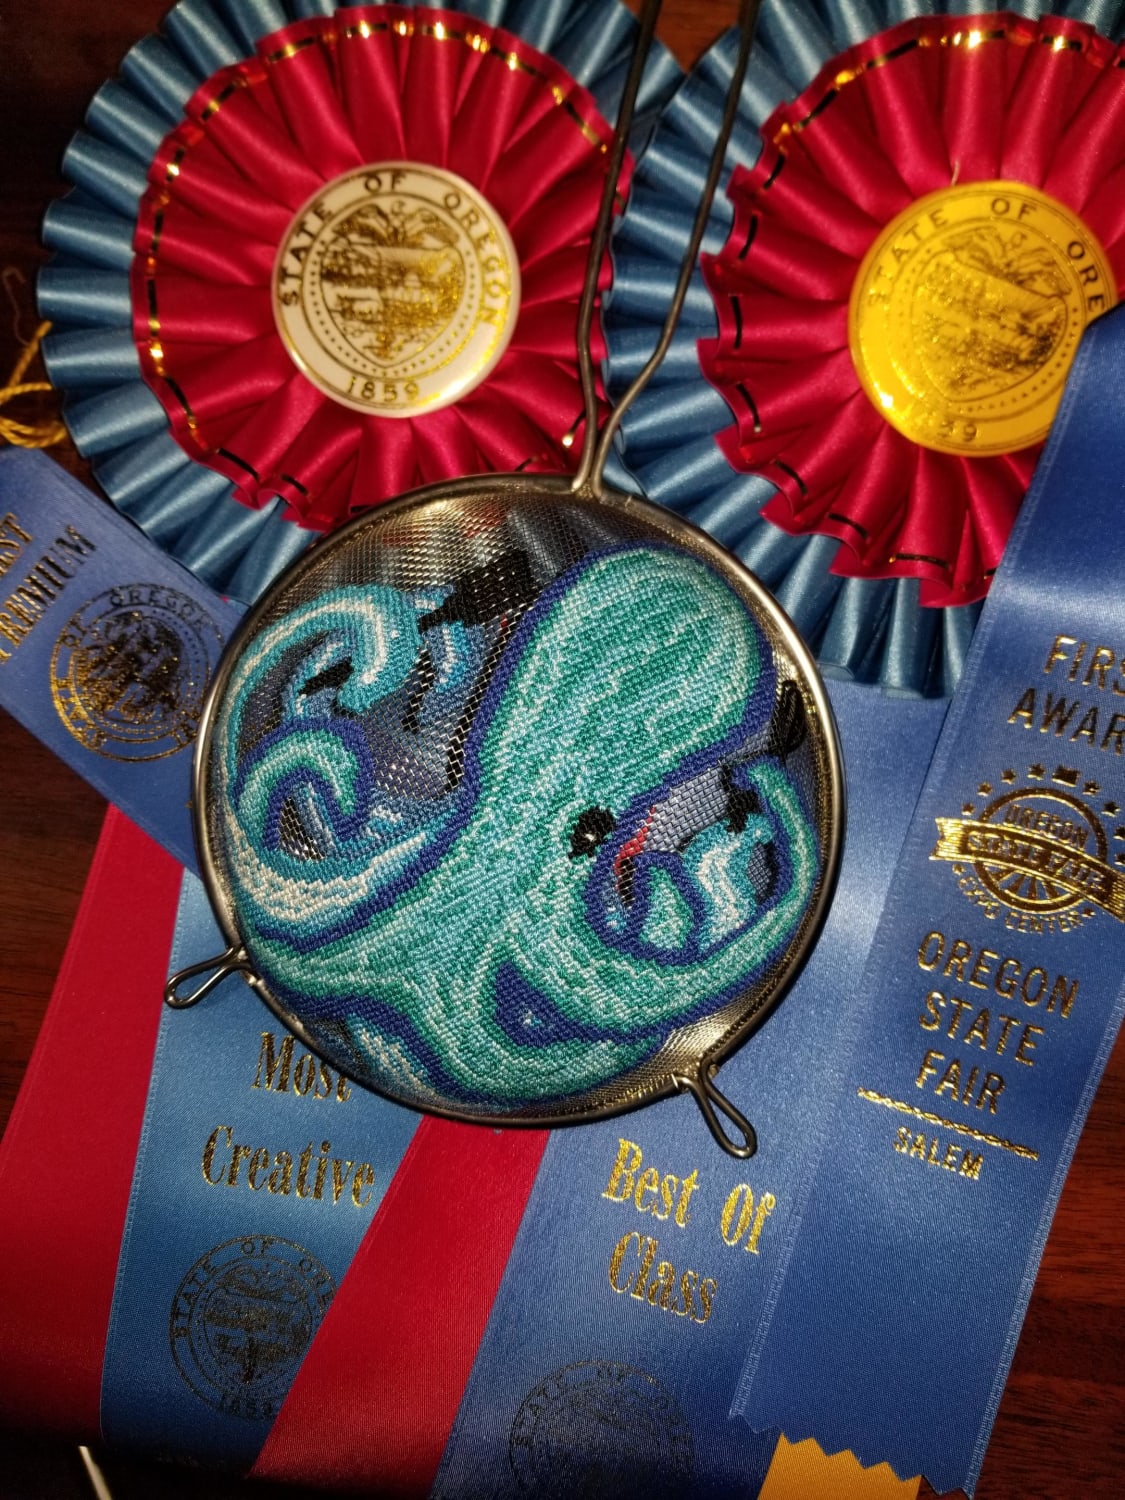 [PIC] Gobsmacked. My Chefalopod won 3 ribbons at the County Fair and 1 at the State Fair.